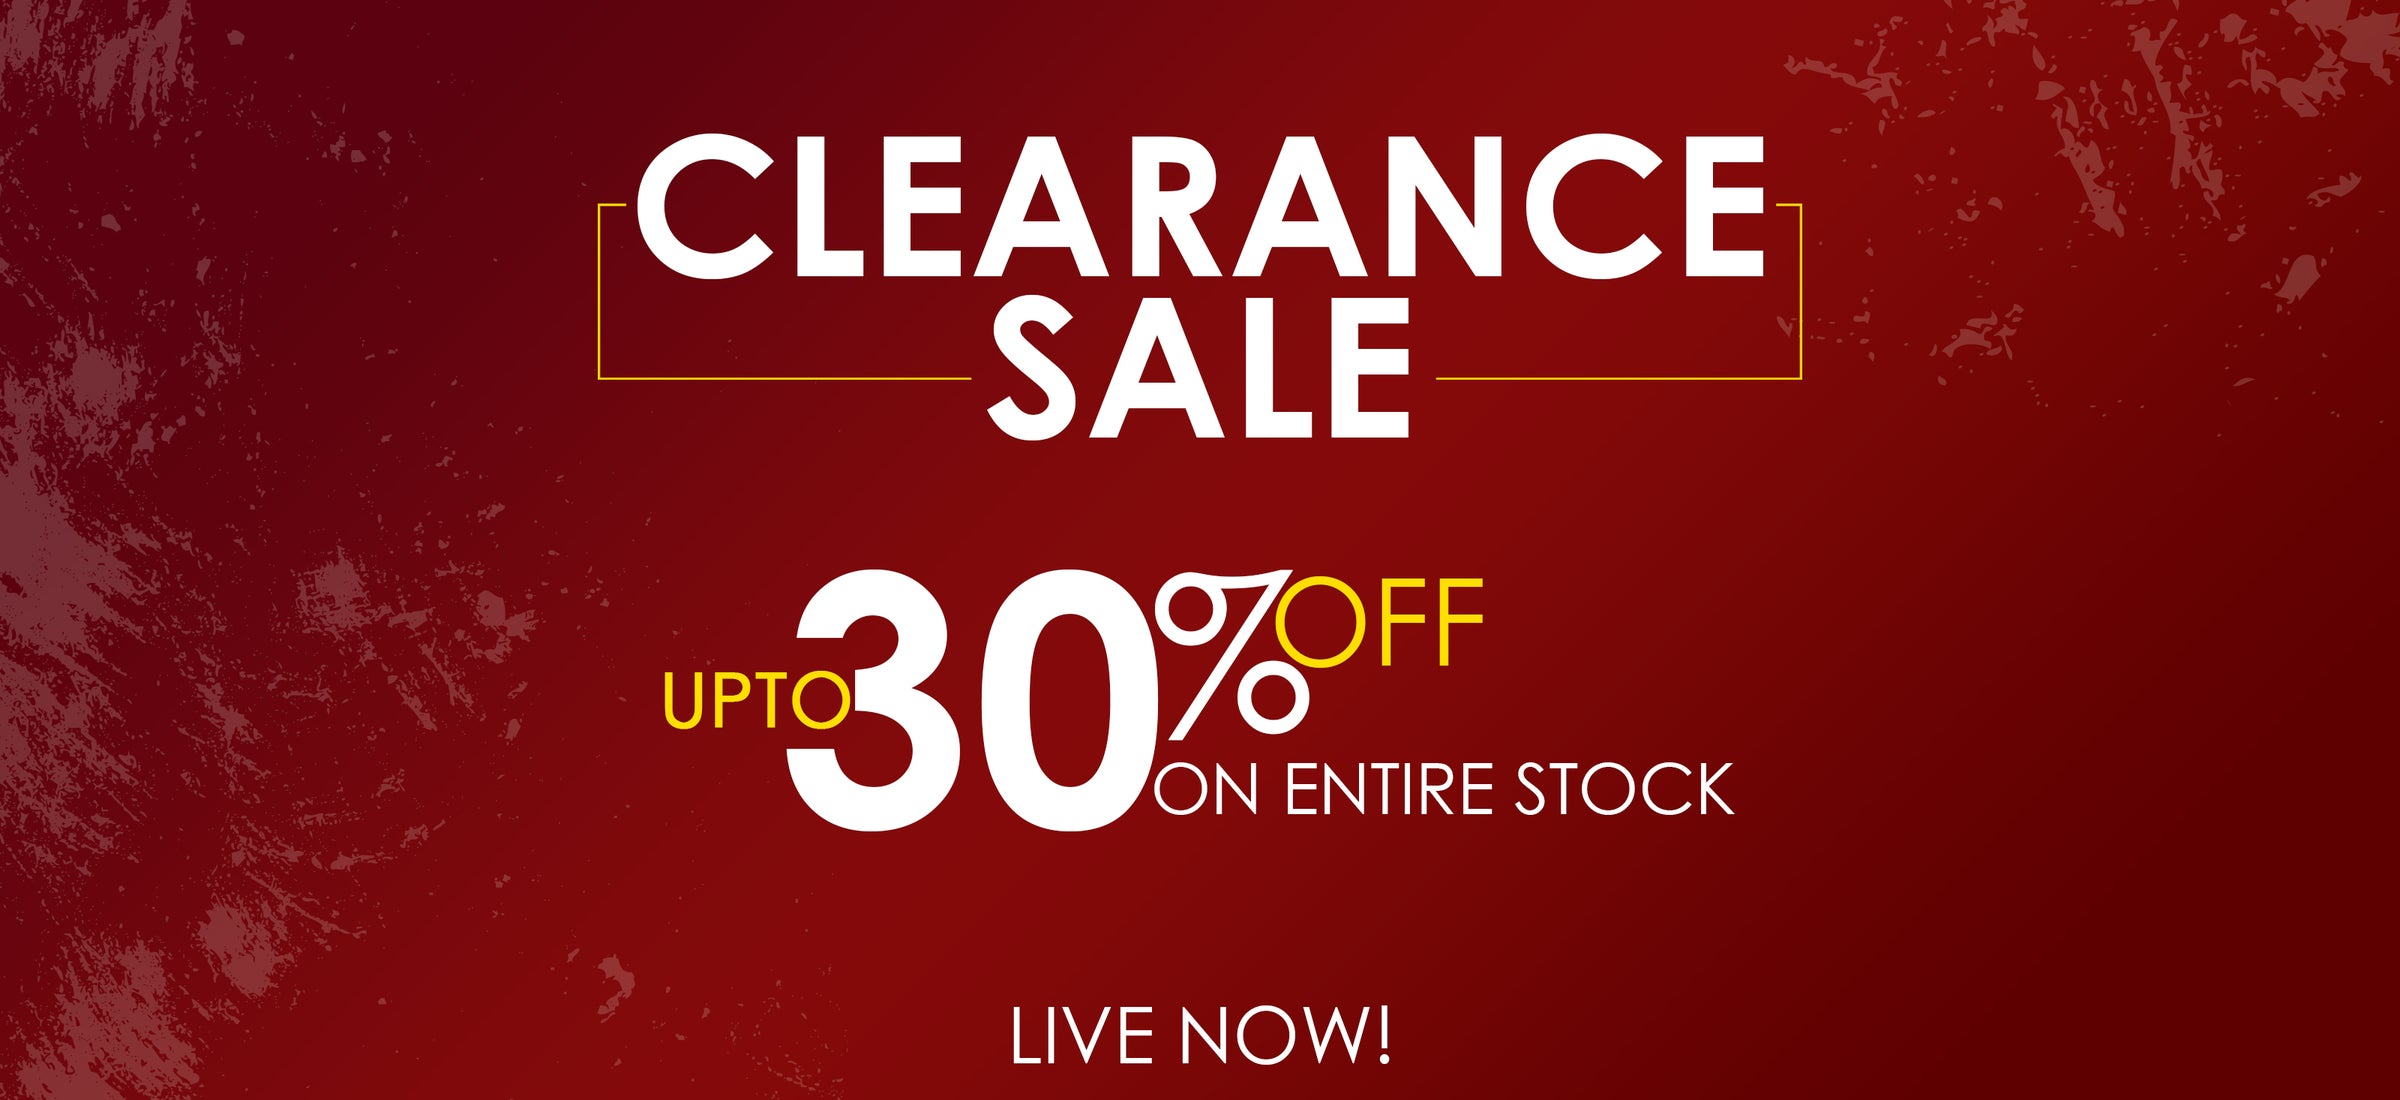 Clearance Sale by jacquard clothing sale upto 30% off on entire stock 